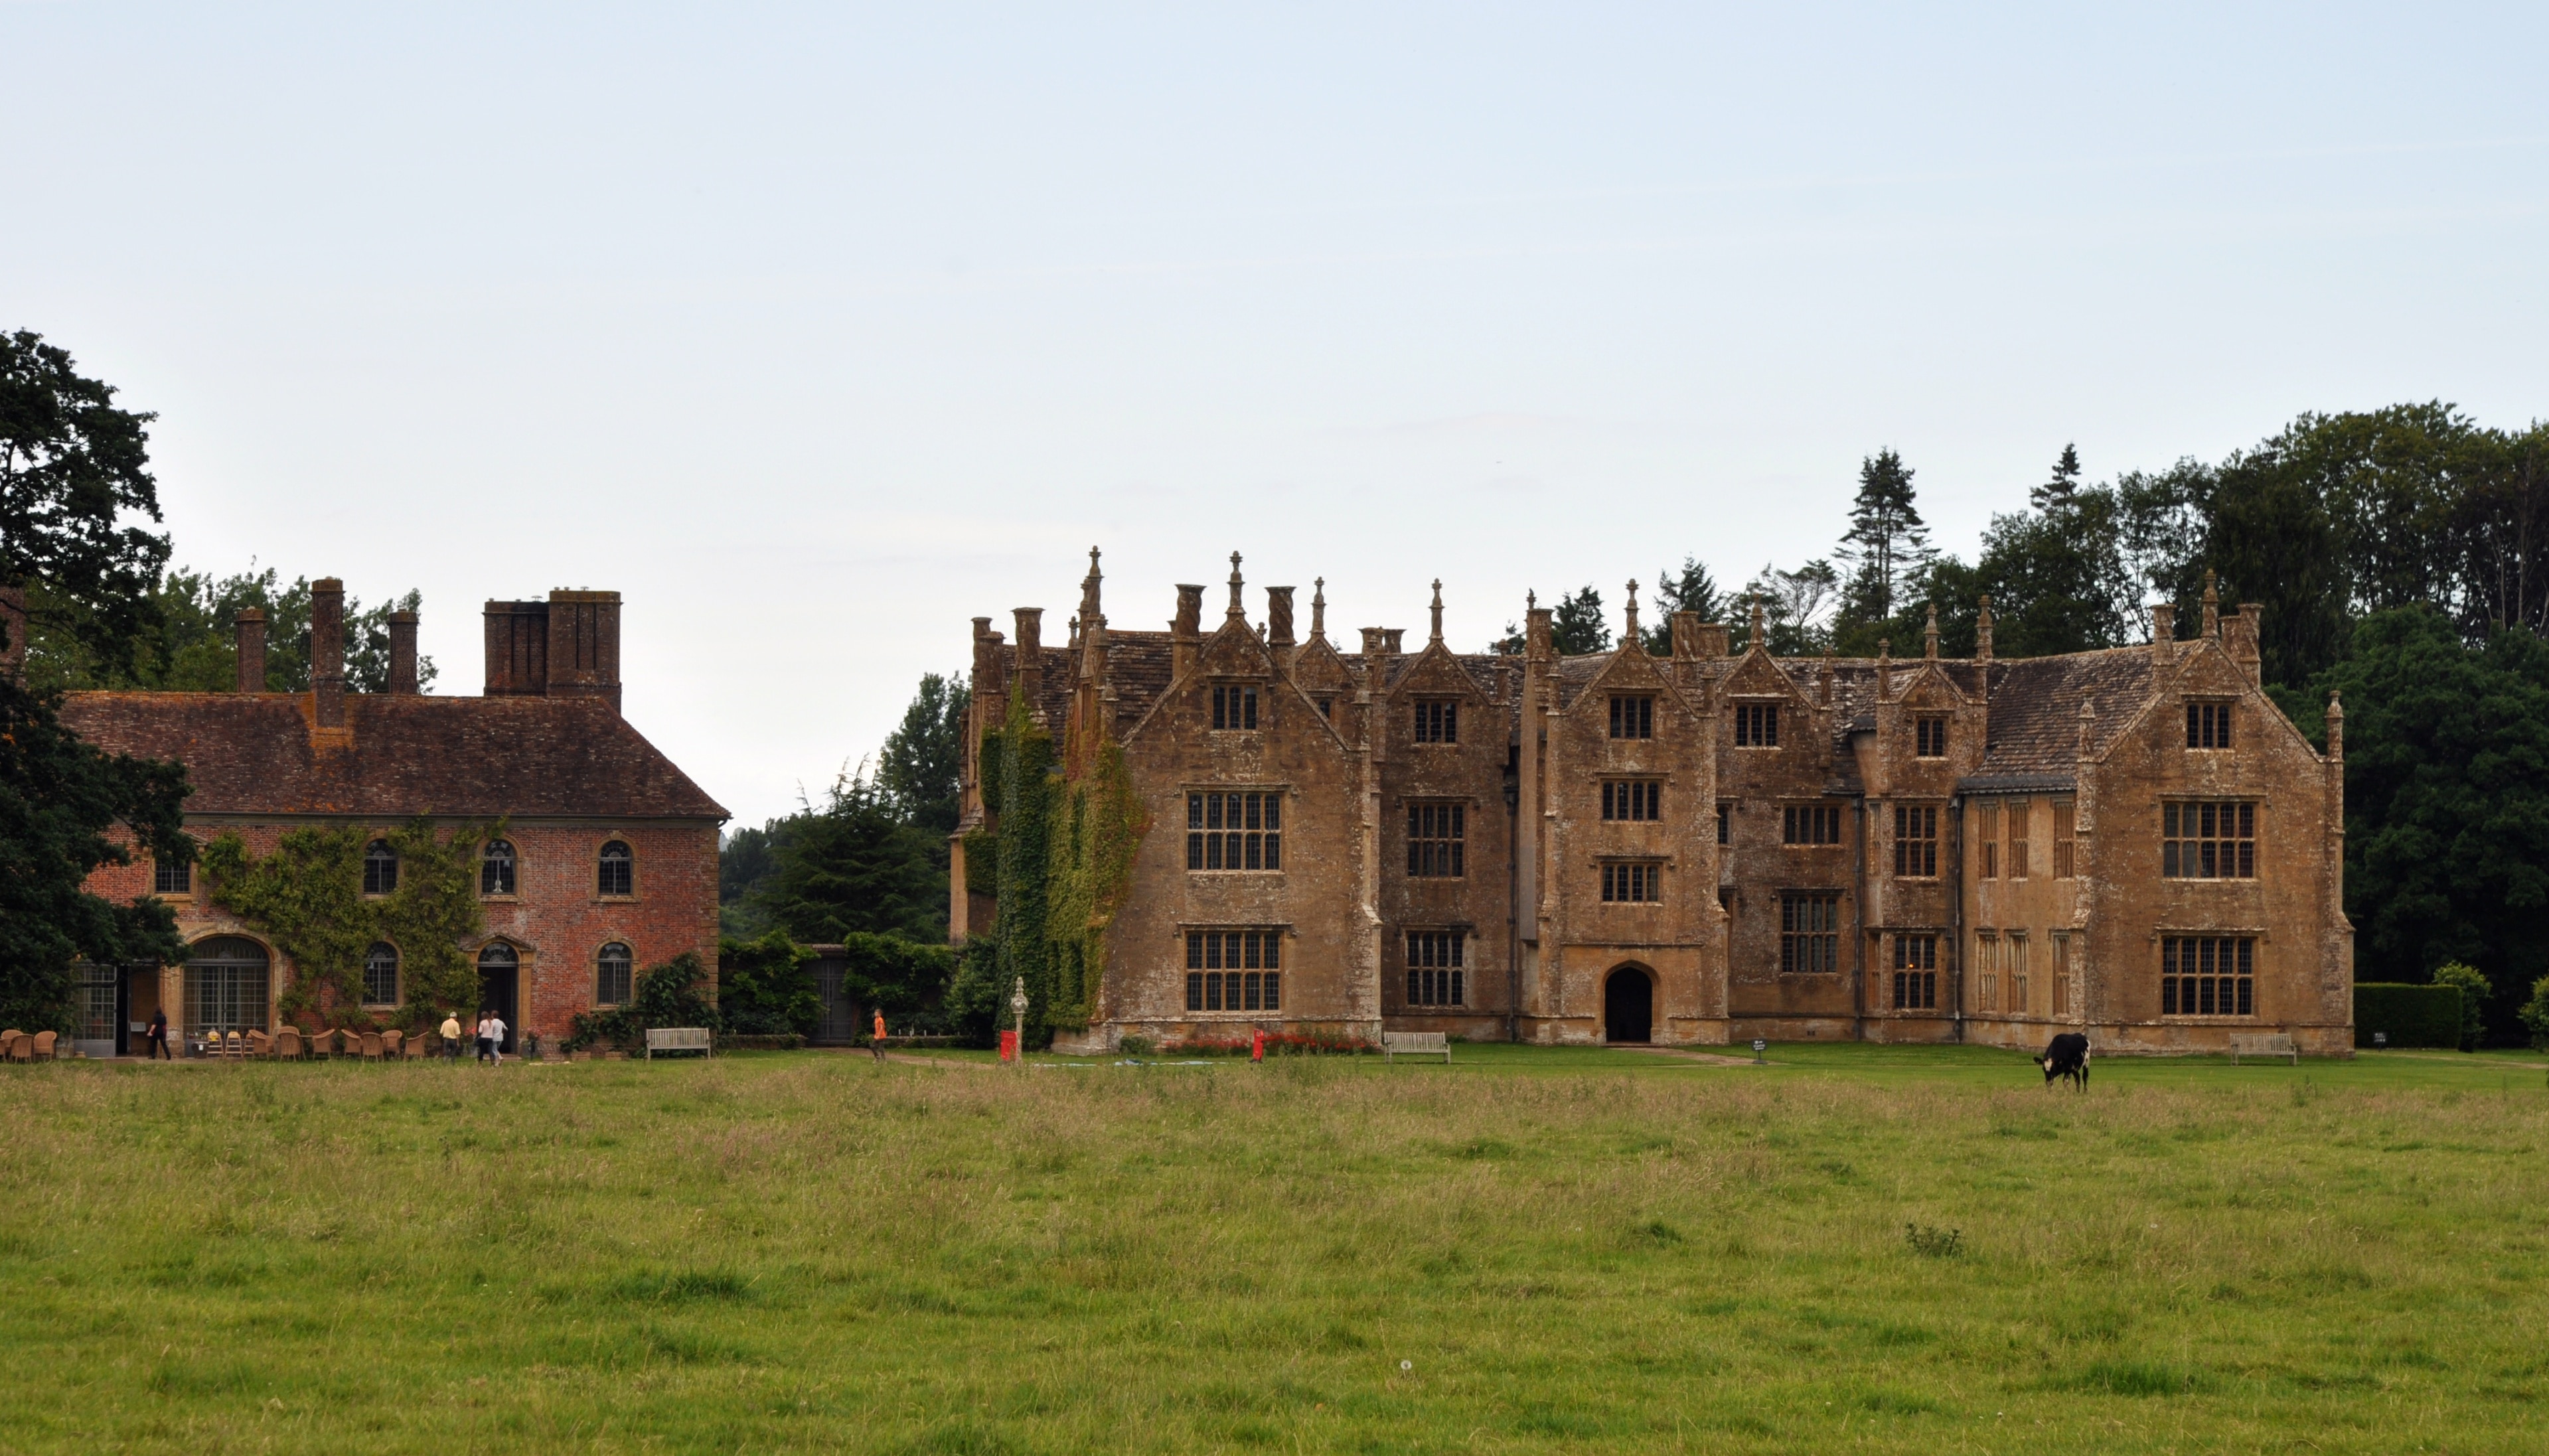 Barrington Court Wikidata has entry Q4863658 with data related to this item.